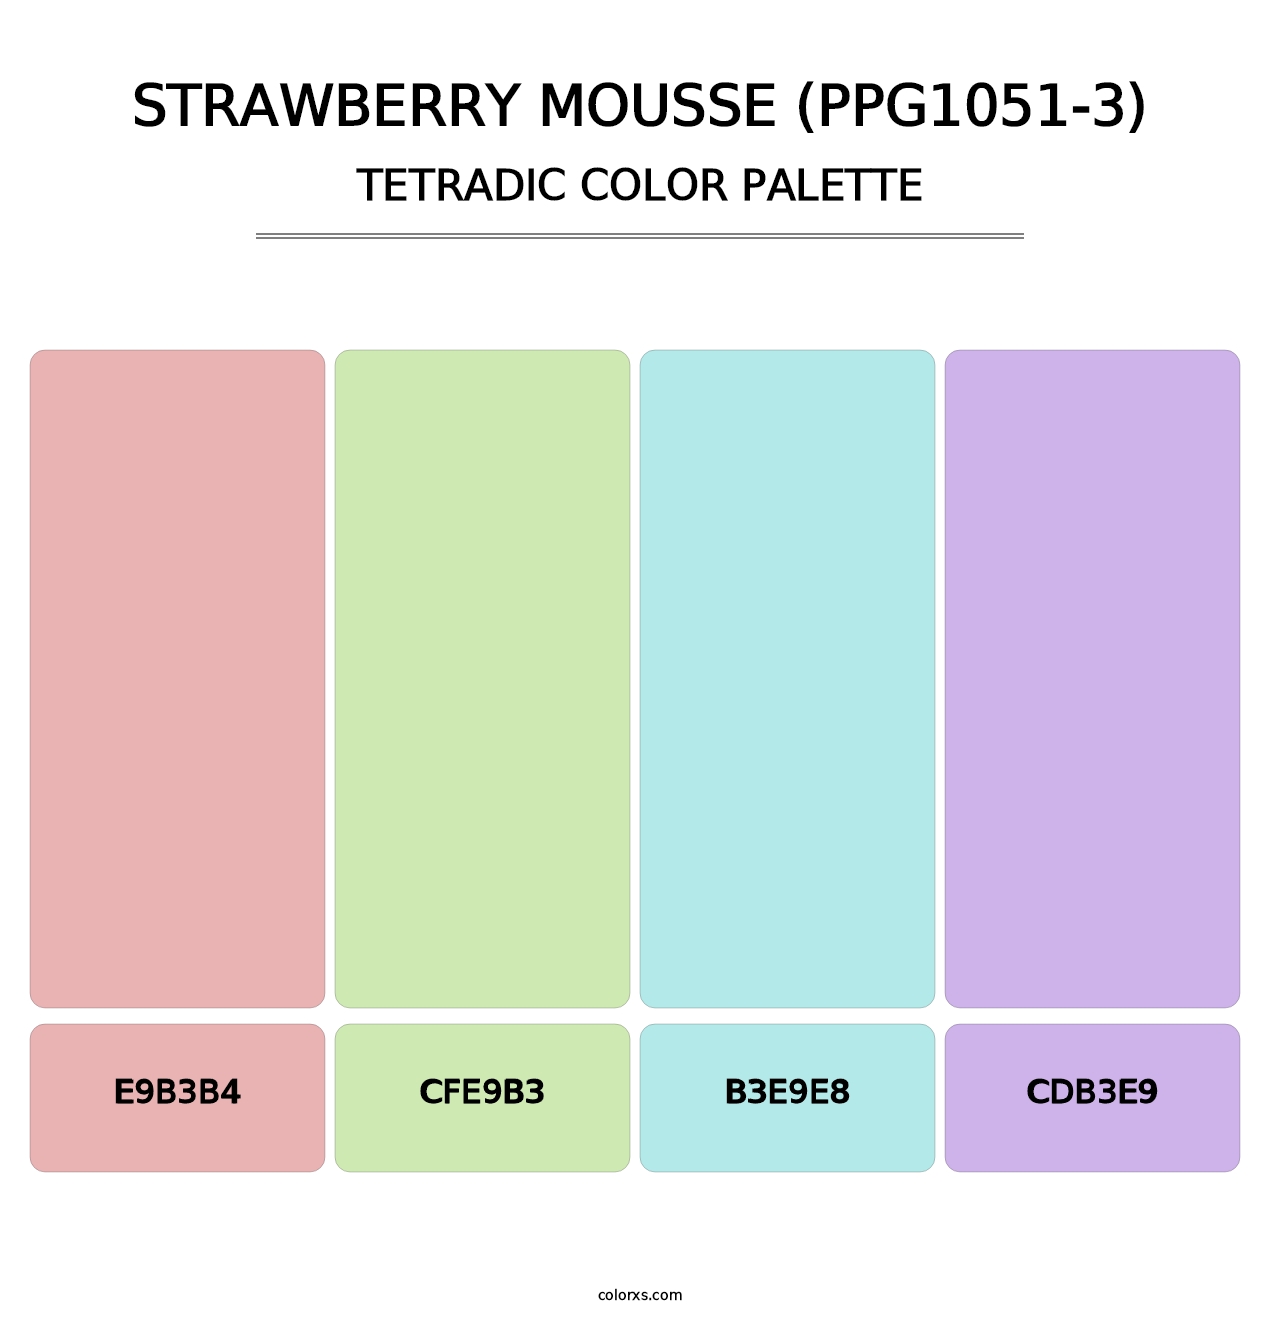 Strawberry Mousse (PPG1051-3) - Tetradic Color Palette